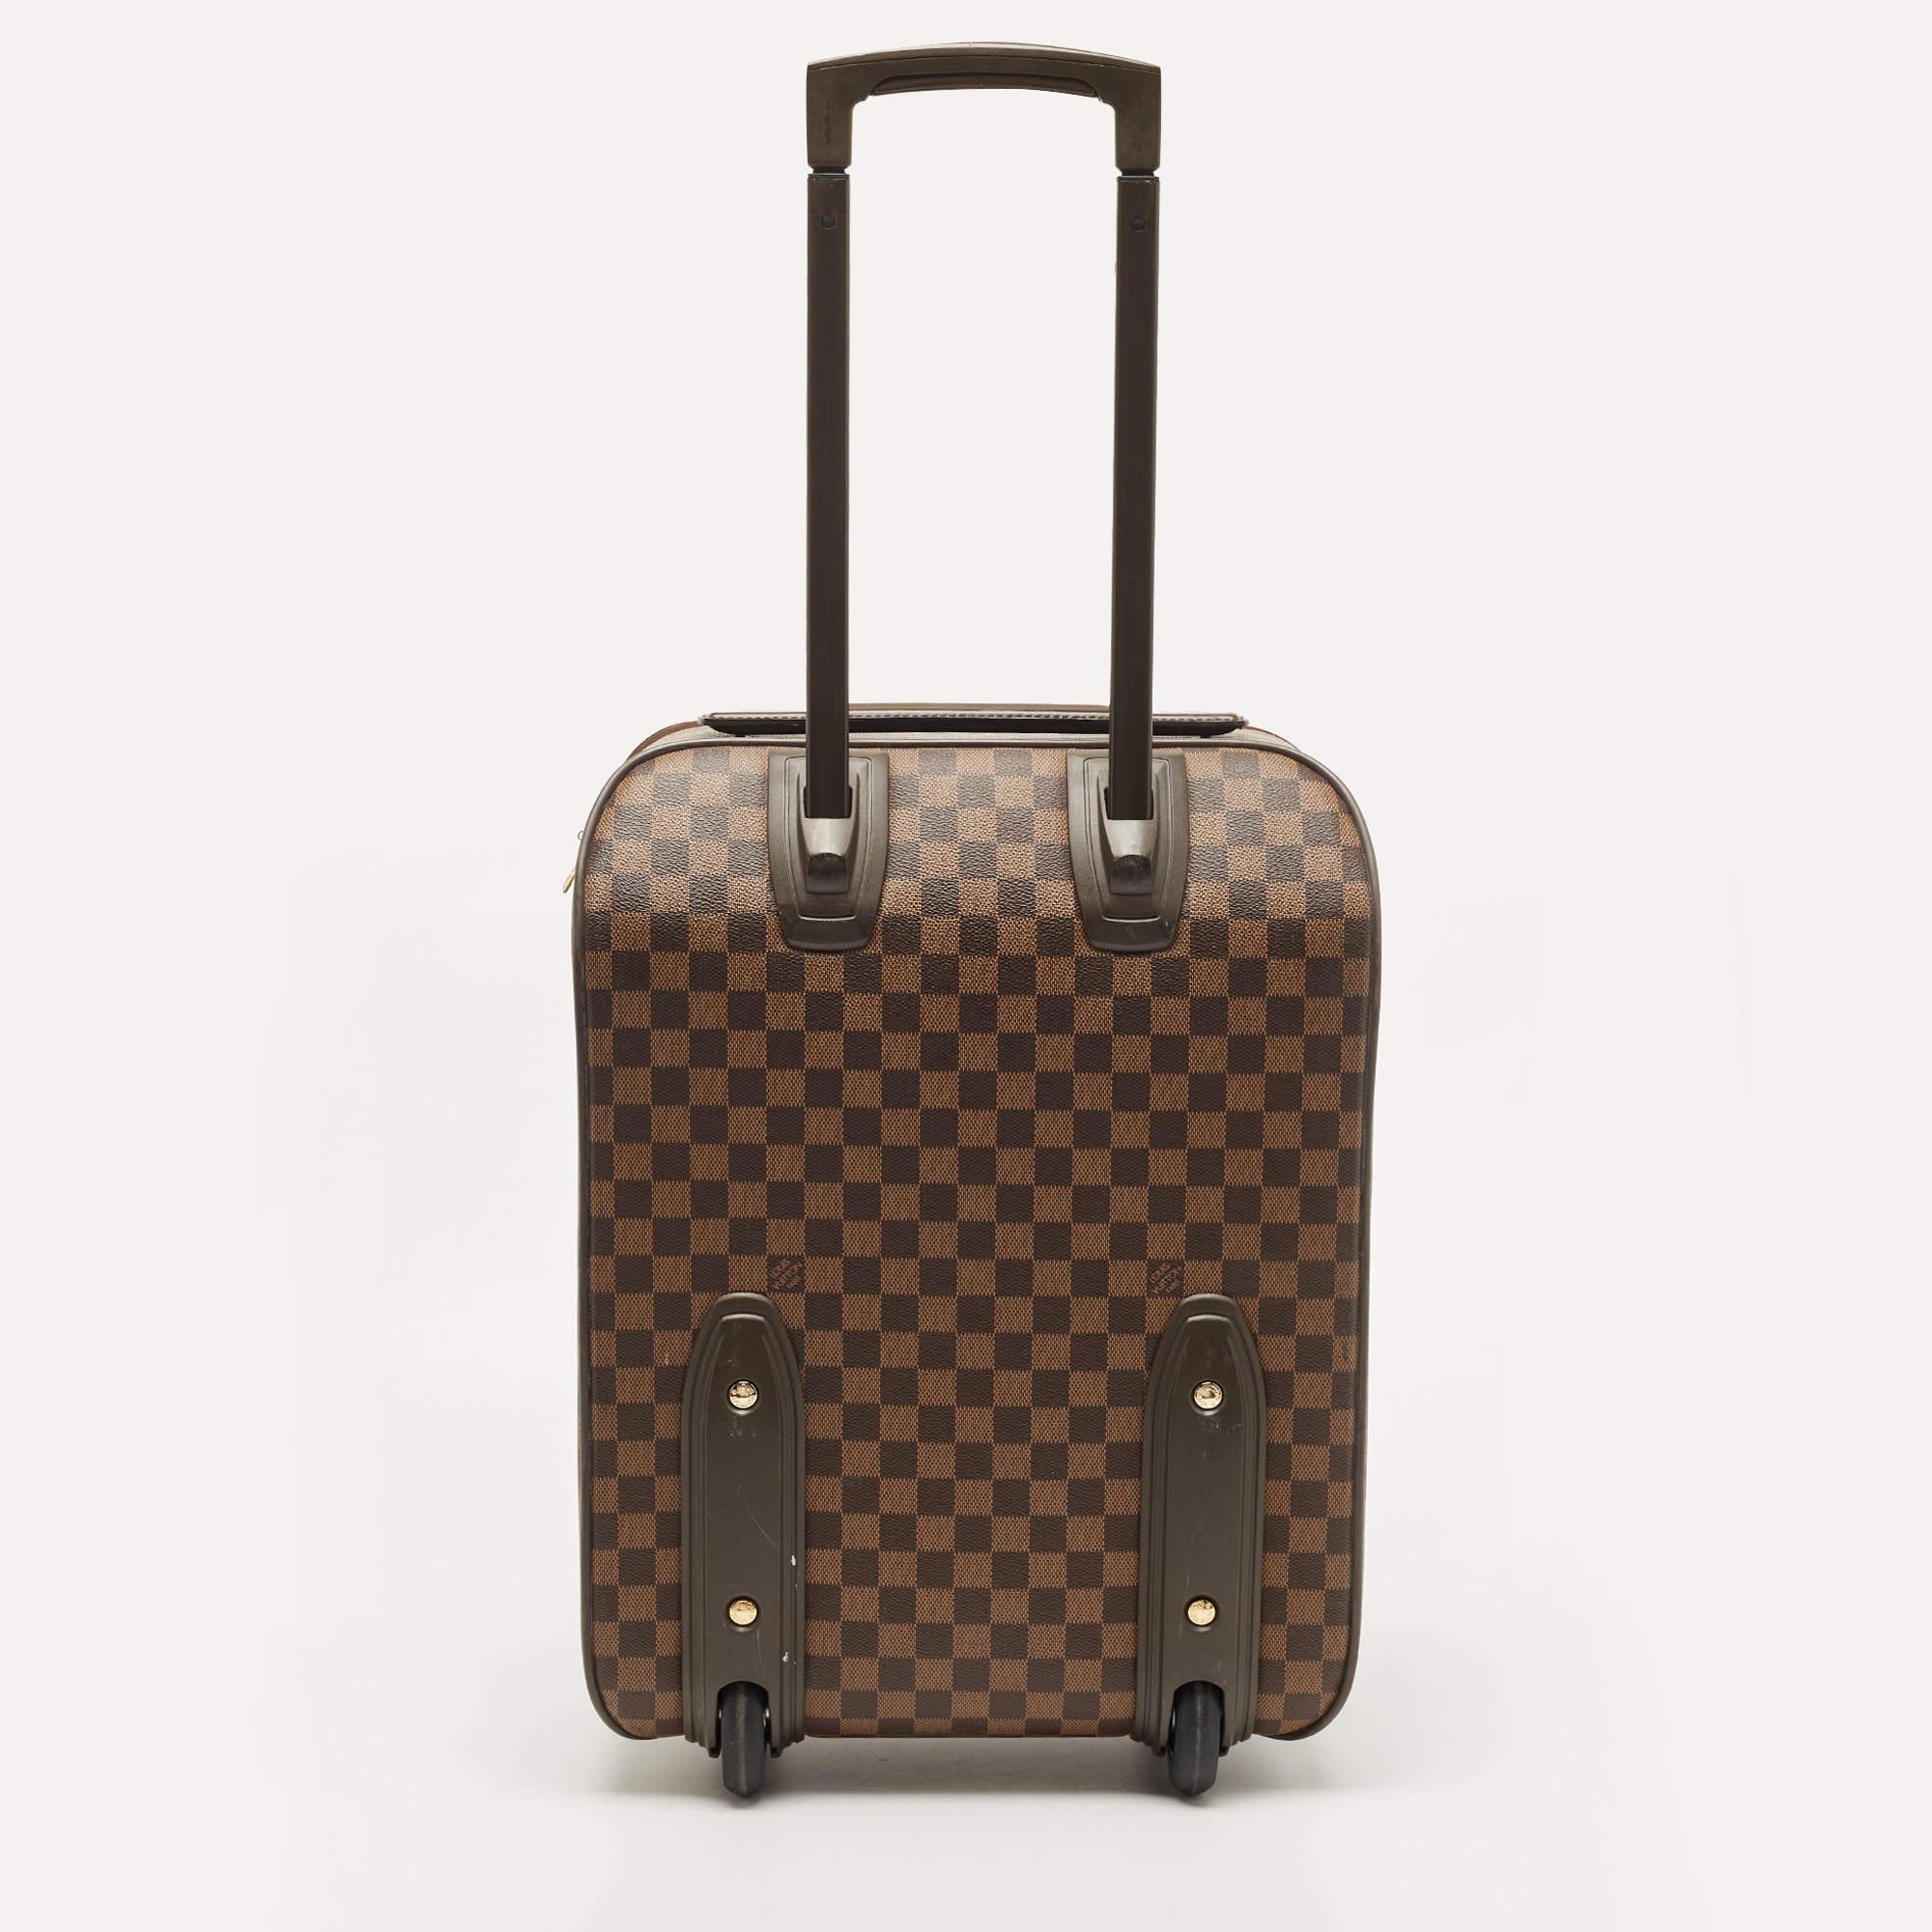 Taking Louis Vuitton's legendary art of travel elegantly forward, this suitcase, crafted from signature materials, flaunts traditional craftsmanship and an innovative, modern design. Lightweight, robust, and ultra-mobile, it glides along smoothly on